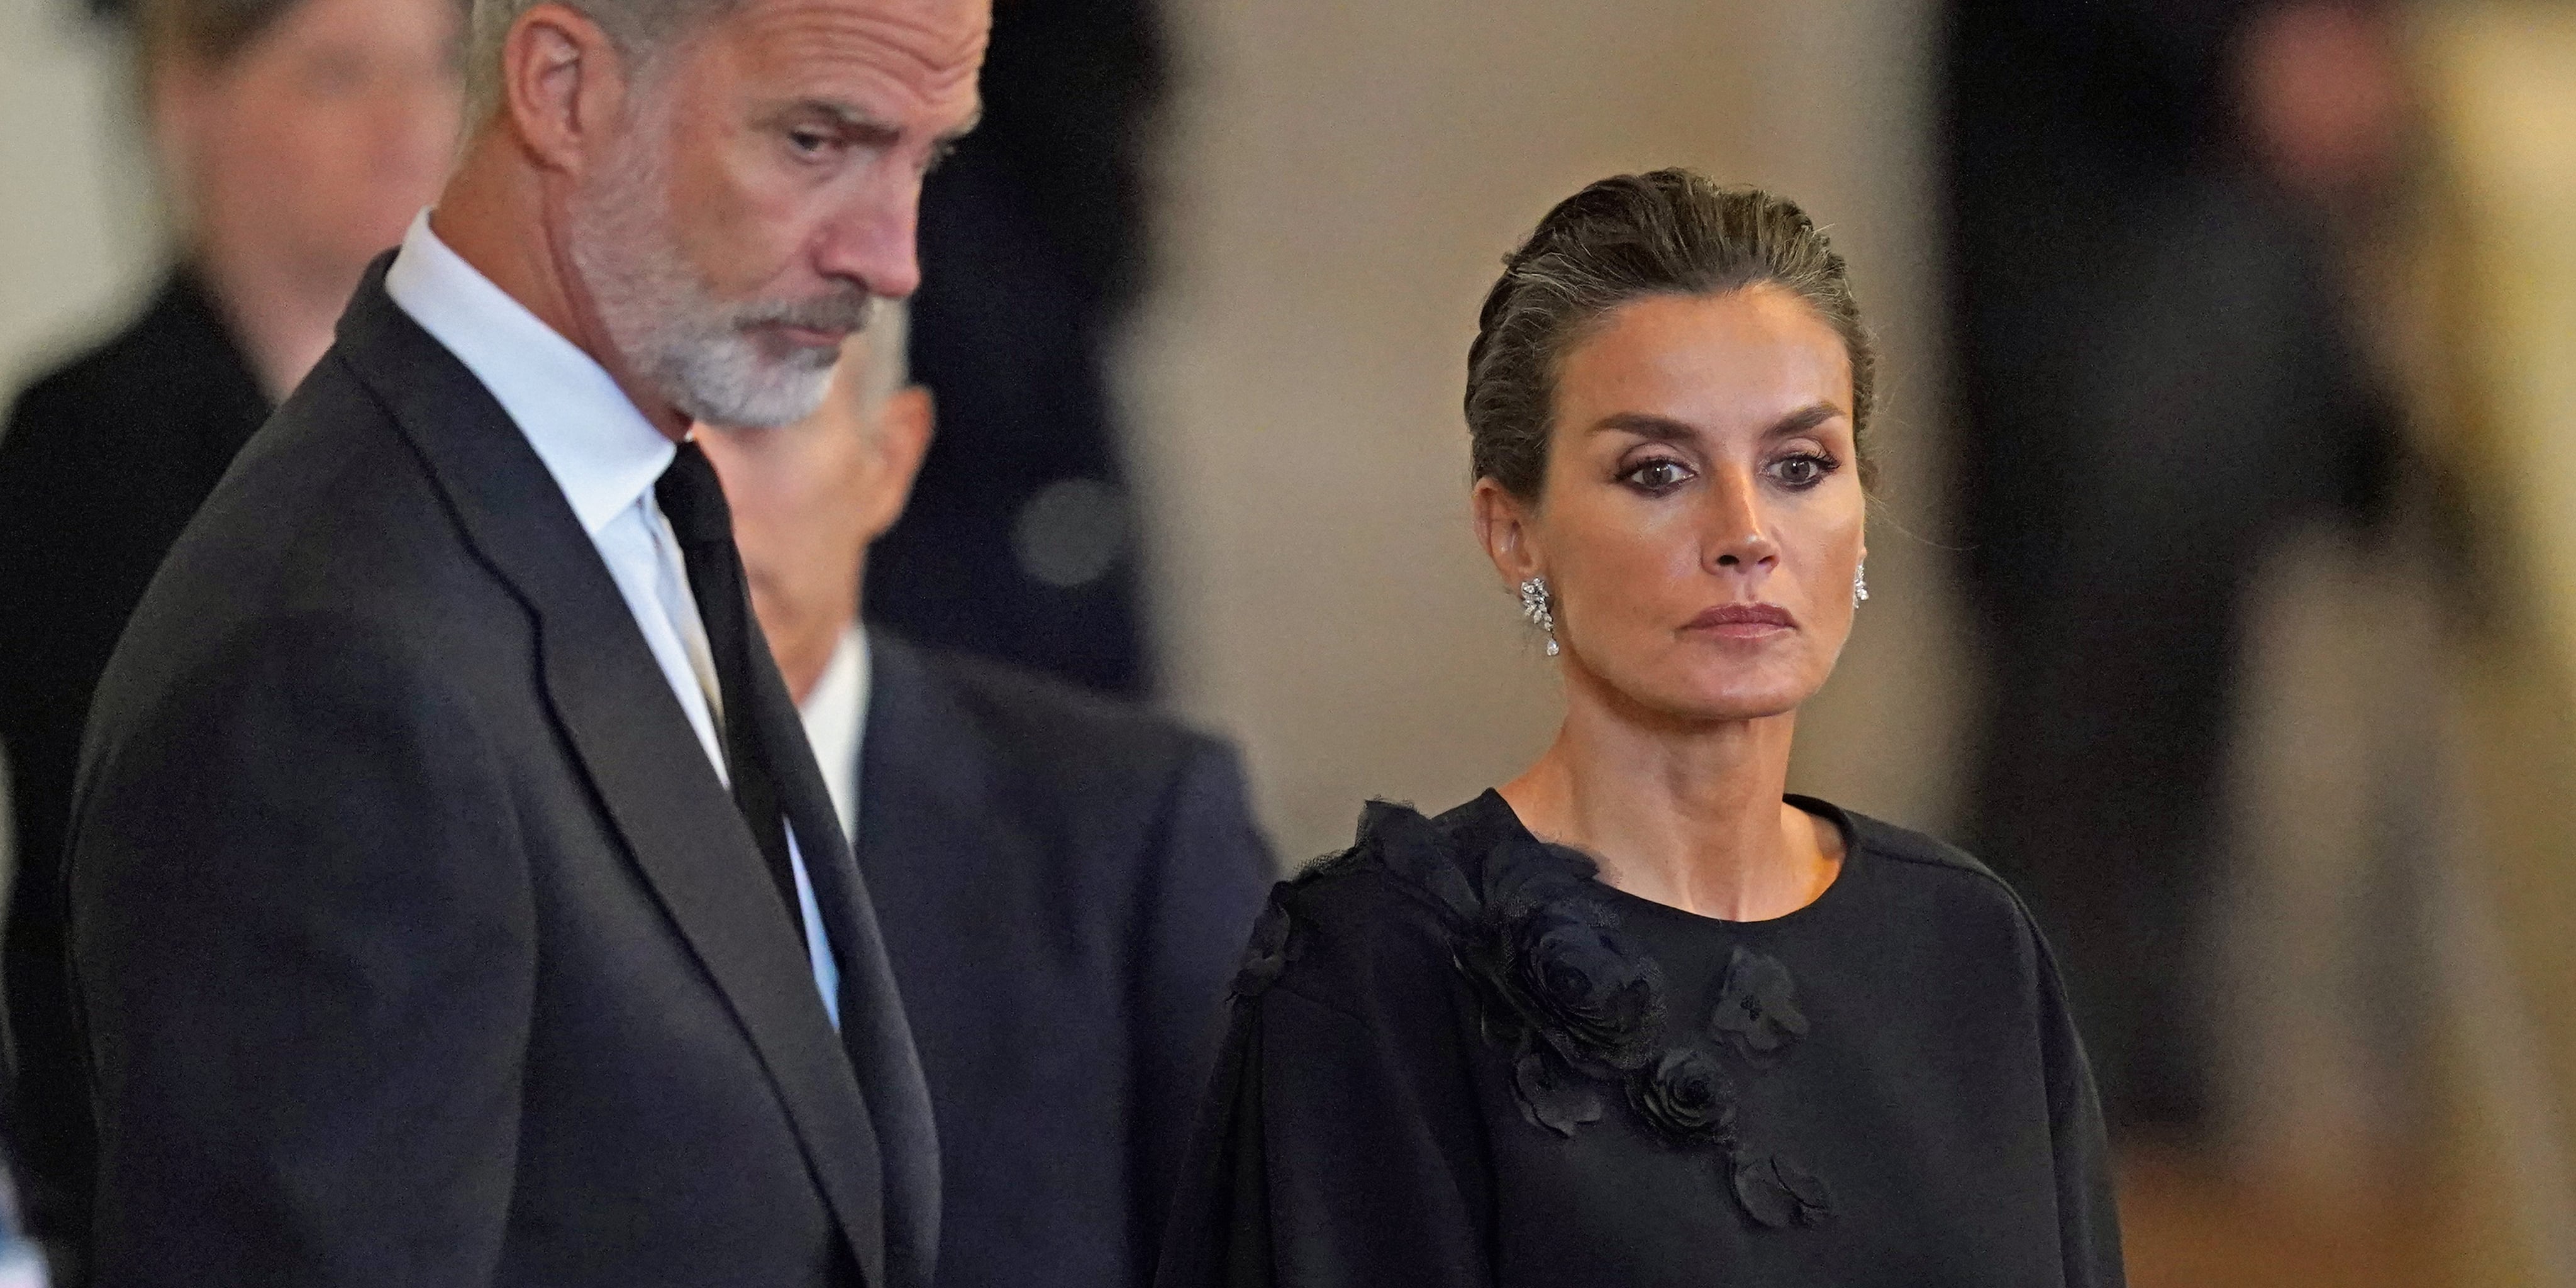 How Queen Letizia of Spain became the ultimate modern royal style icon